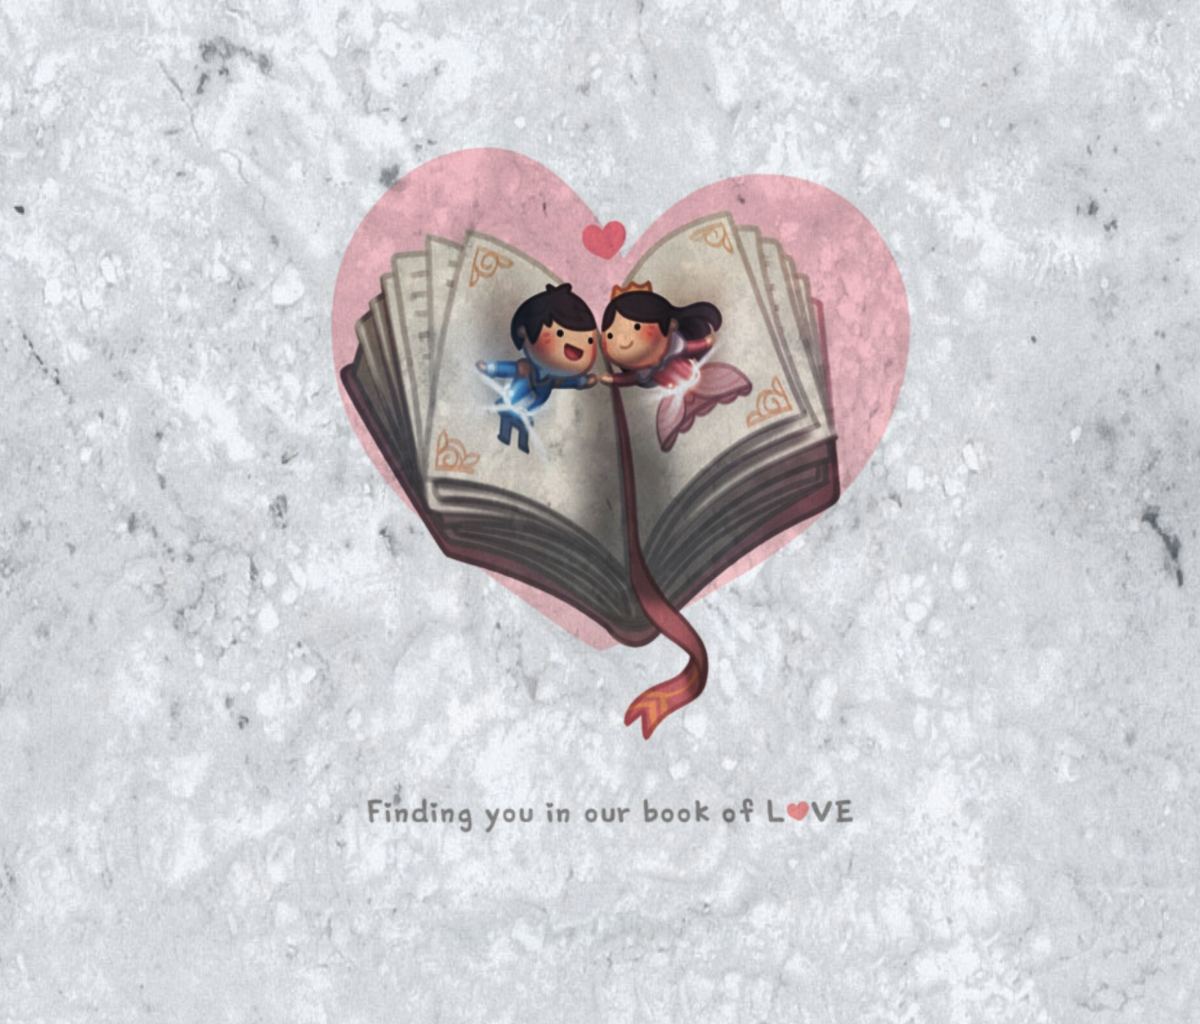 Love Is Finding You In Our Book Of Love screenshot #1 1200x1024